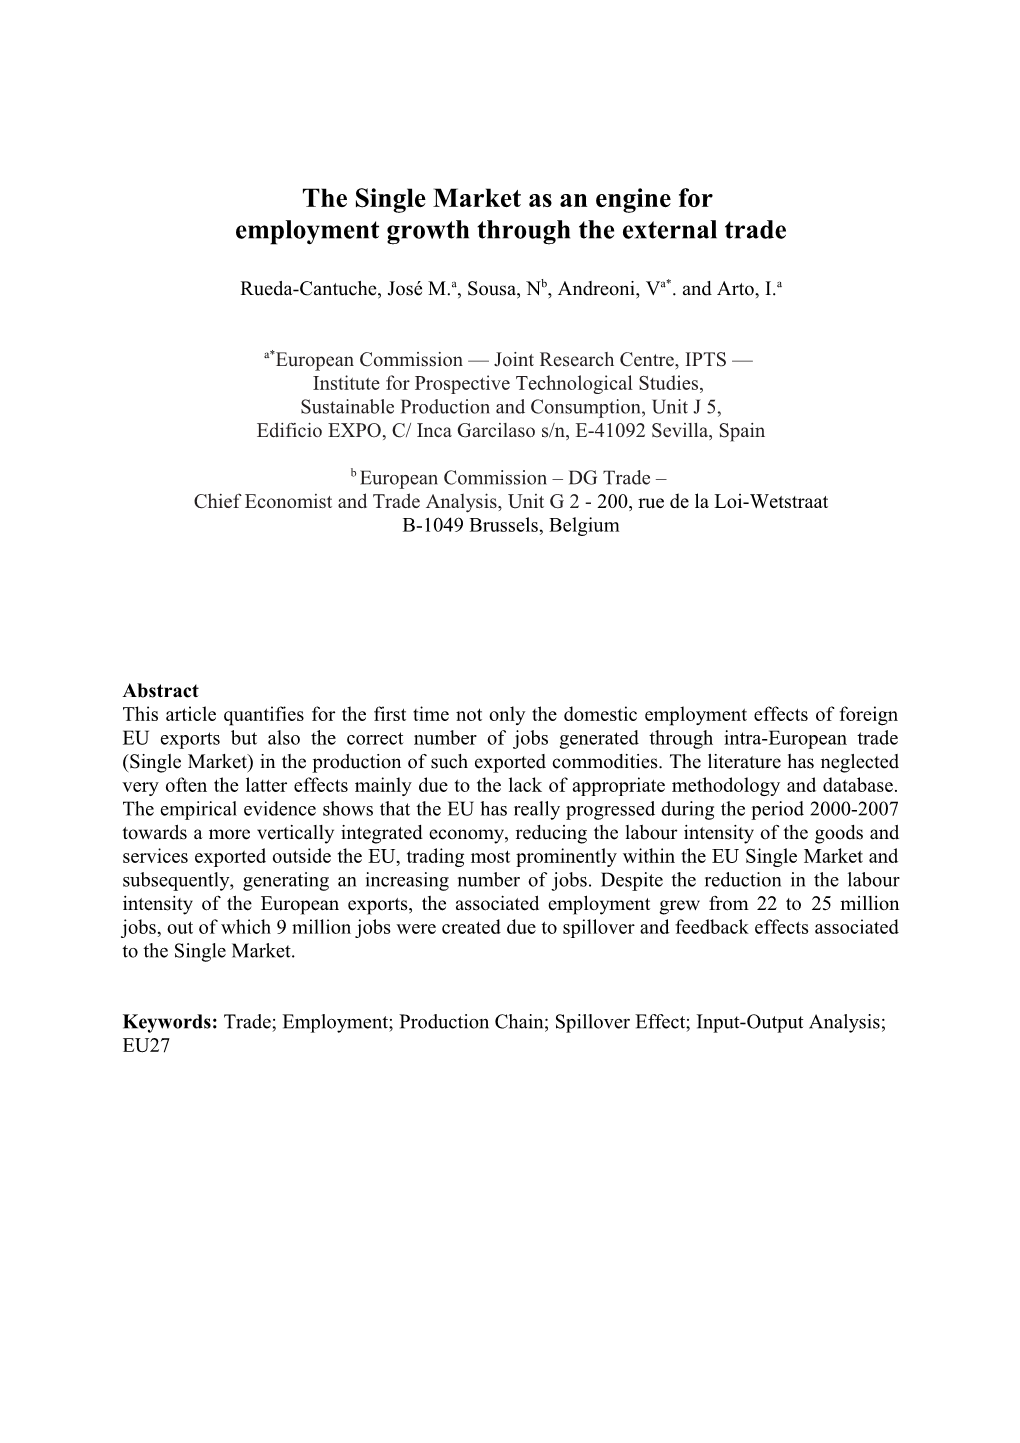 This Paper Quantifies the Total Employment Generated in EU by the Extra European Export